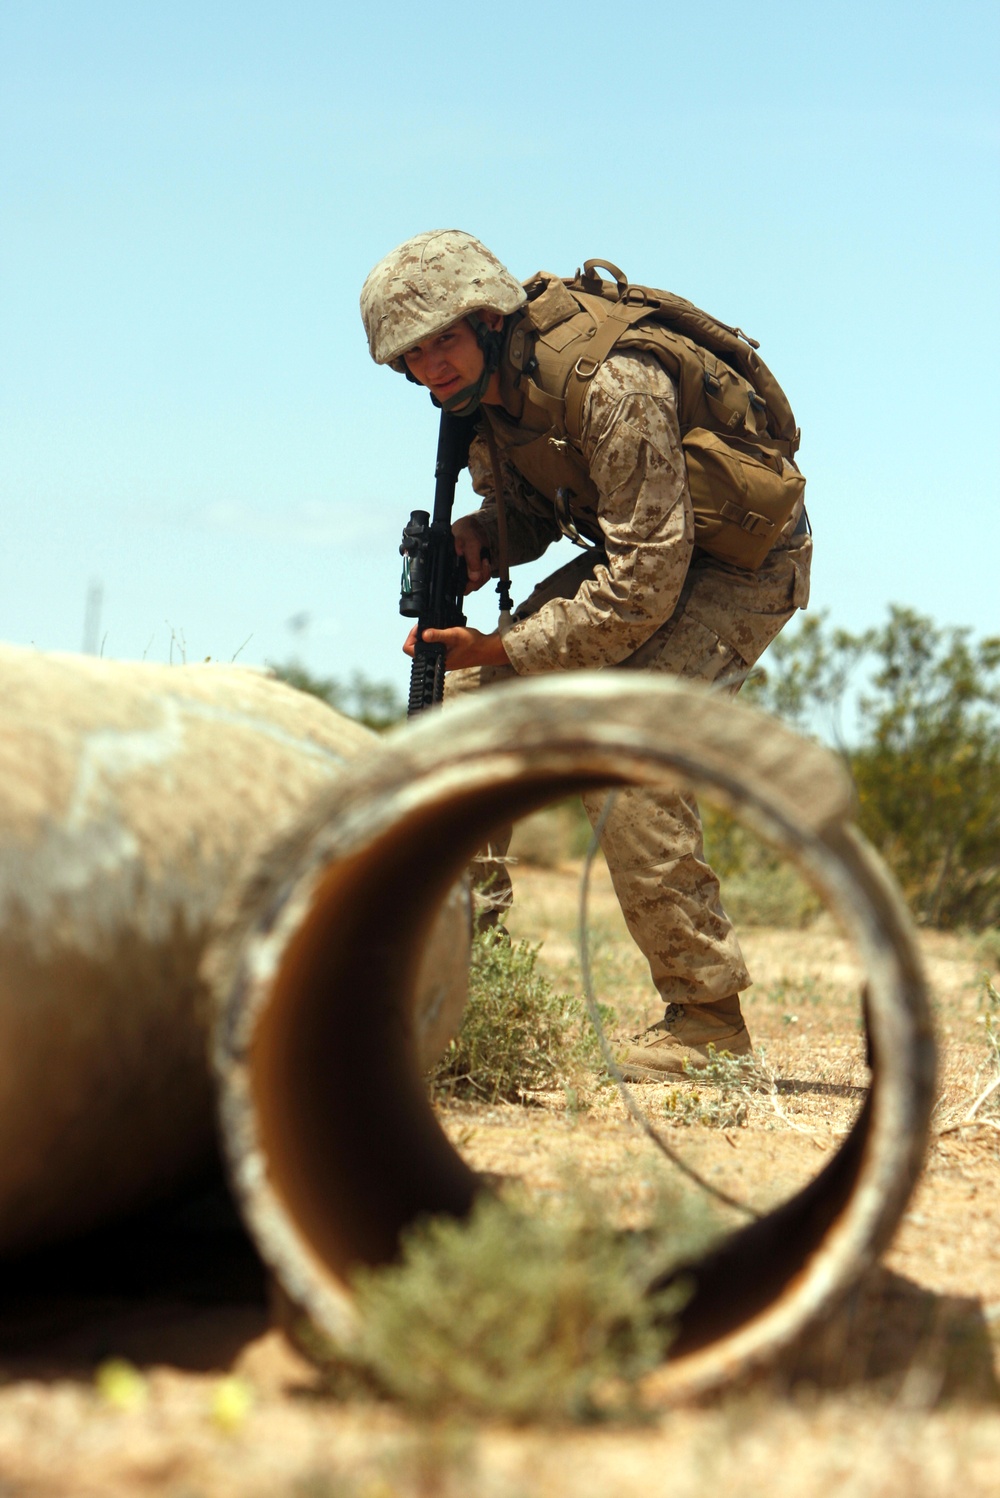 Combat Center Marines train to counter IED threats at Range 800